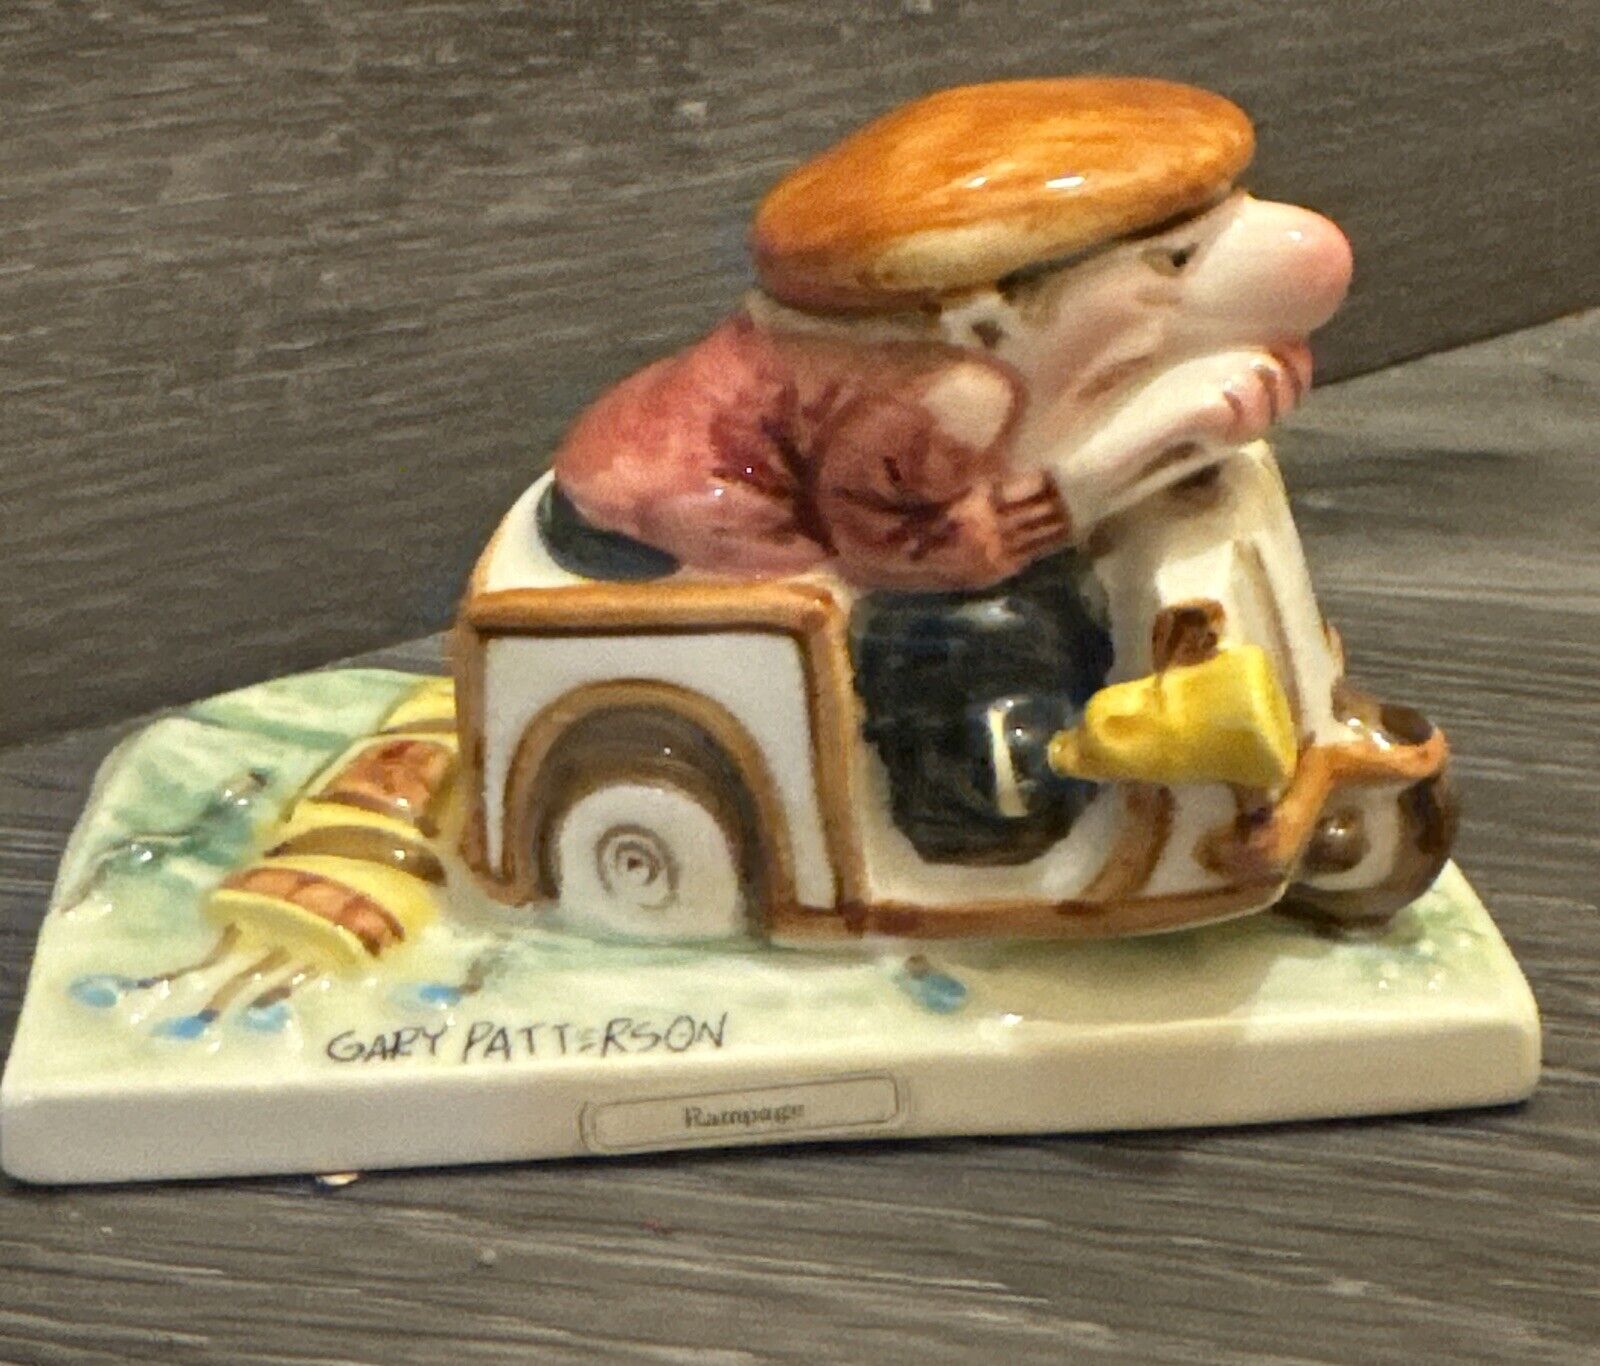 Figurine Gary Patterson Rampage Golf Cart Clubs Collectible 1978 Ceramic Vintage